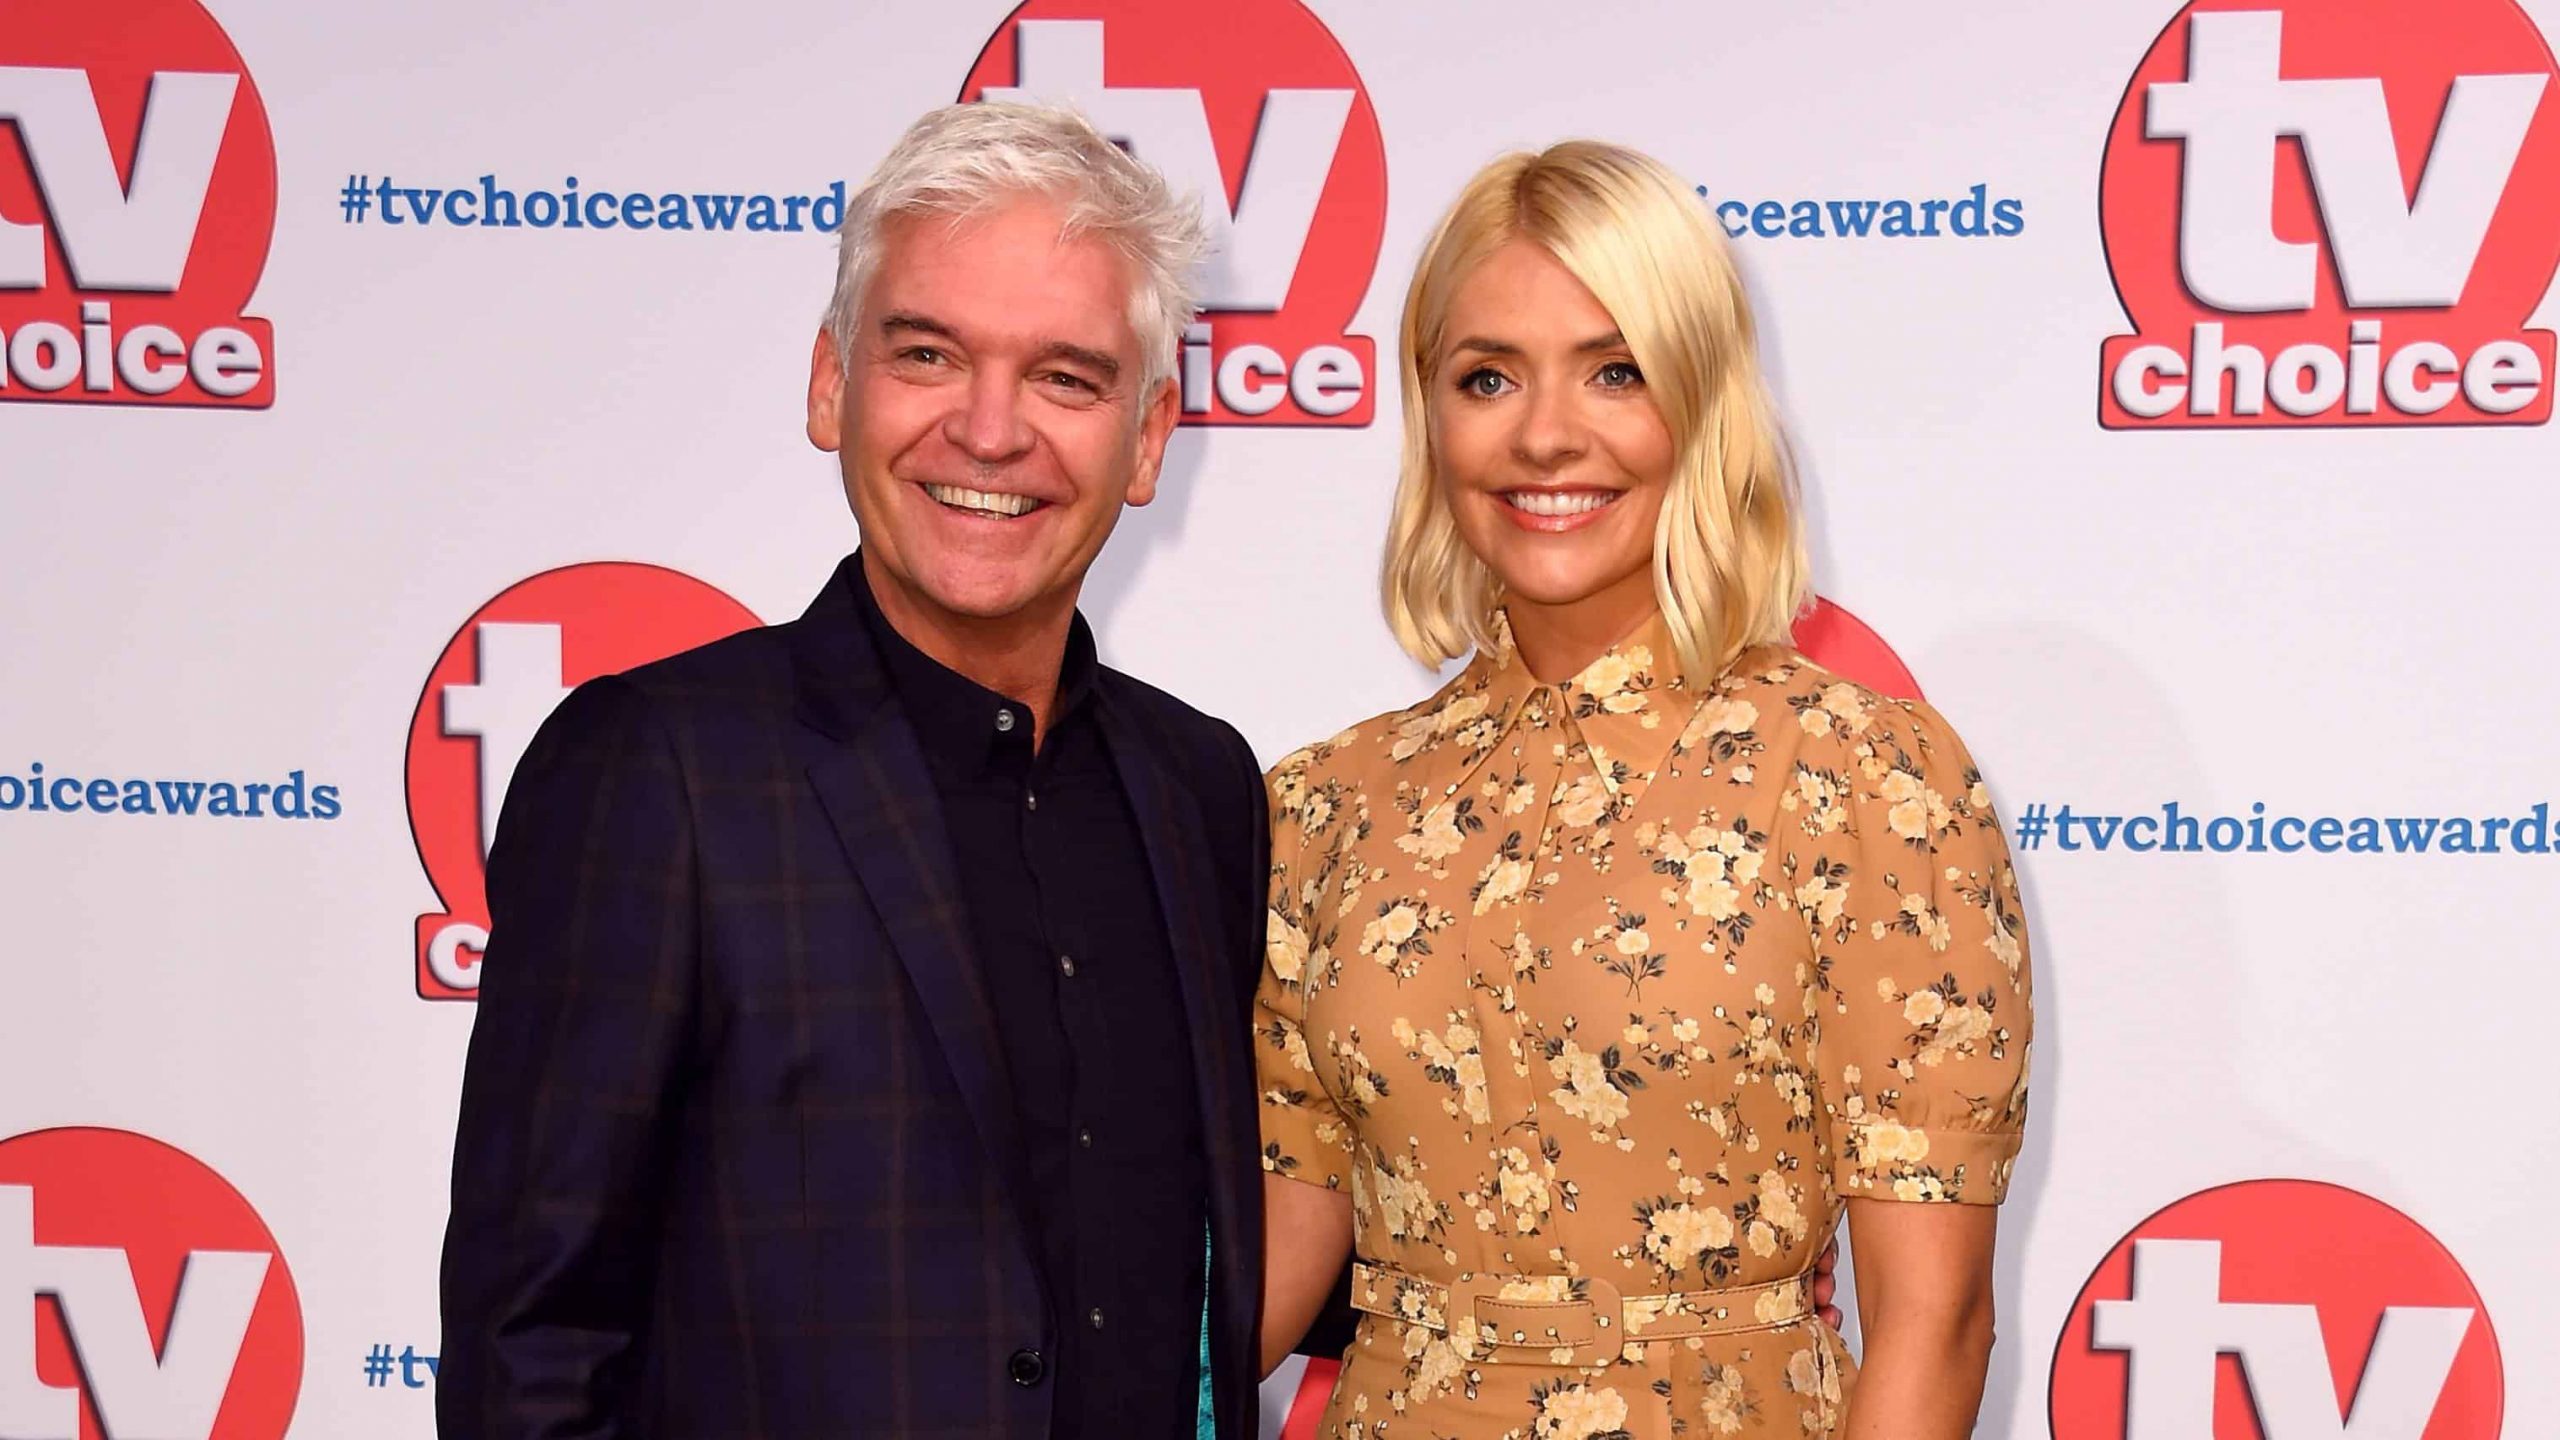 Phillip Schofield announces he is gay on Instagram